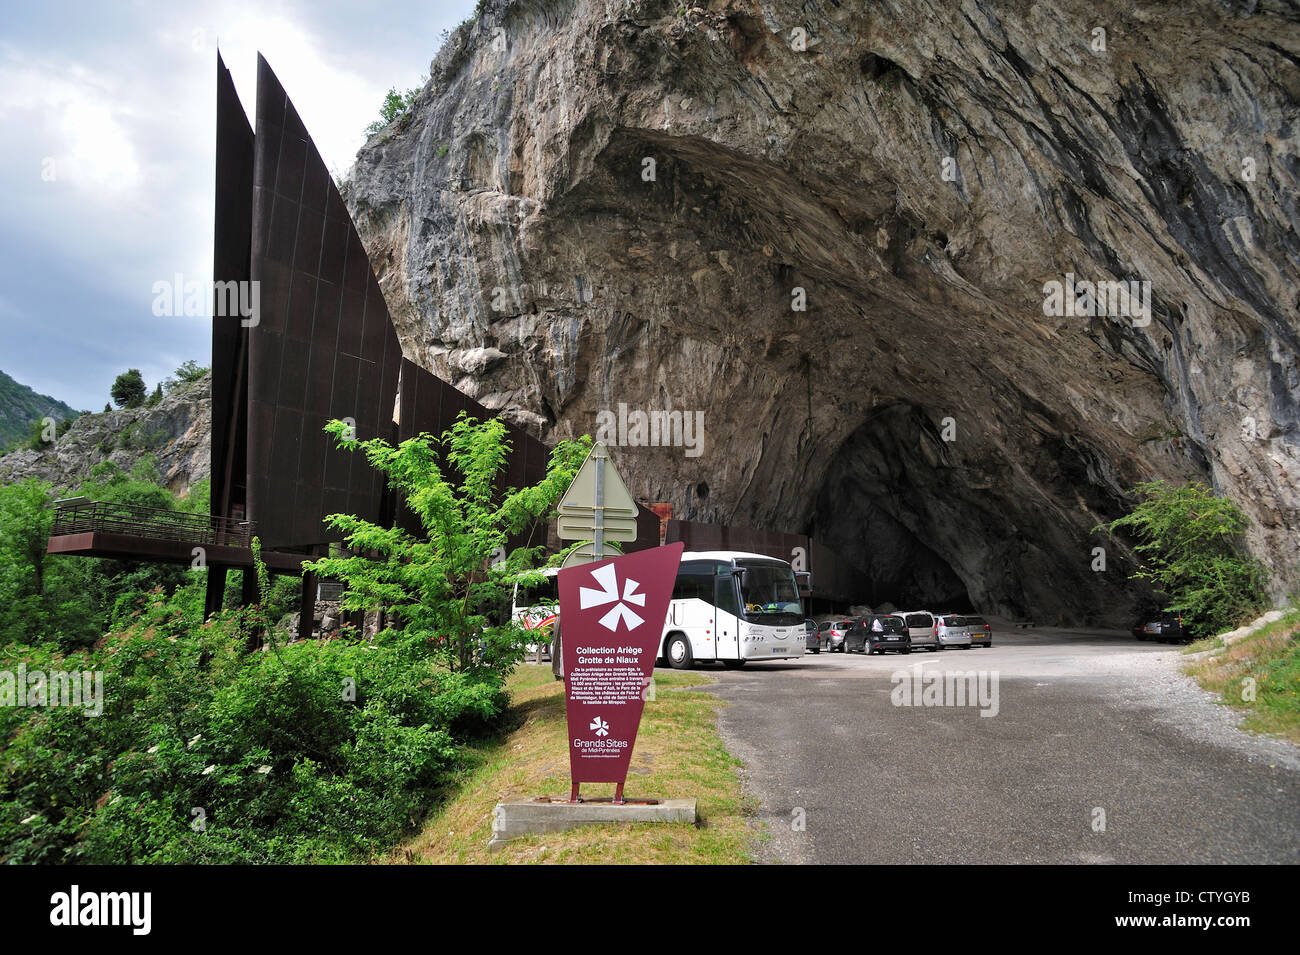 Entrance of the Cave of Niaux, famous for its prehistoric paintings from the Magdalenian period, Midi-Pyrénées, Pyrenees, France Stock Photo